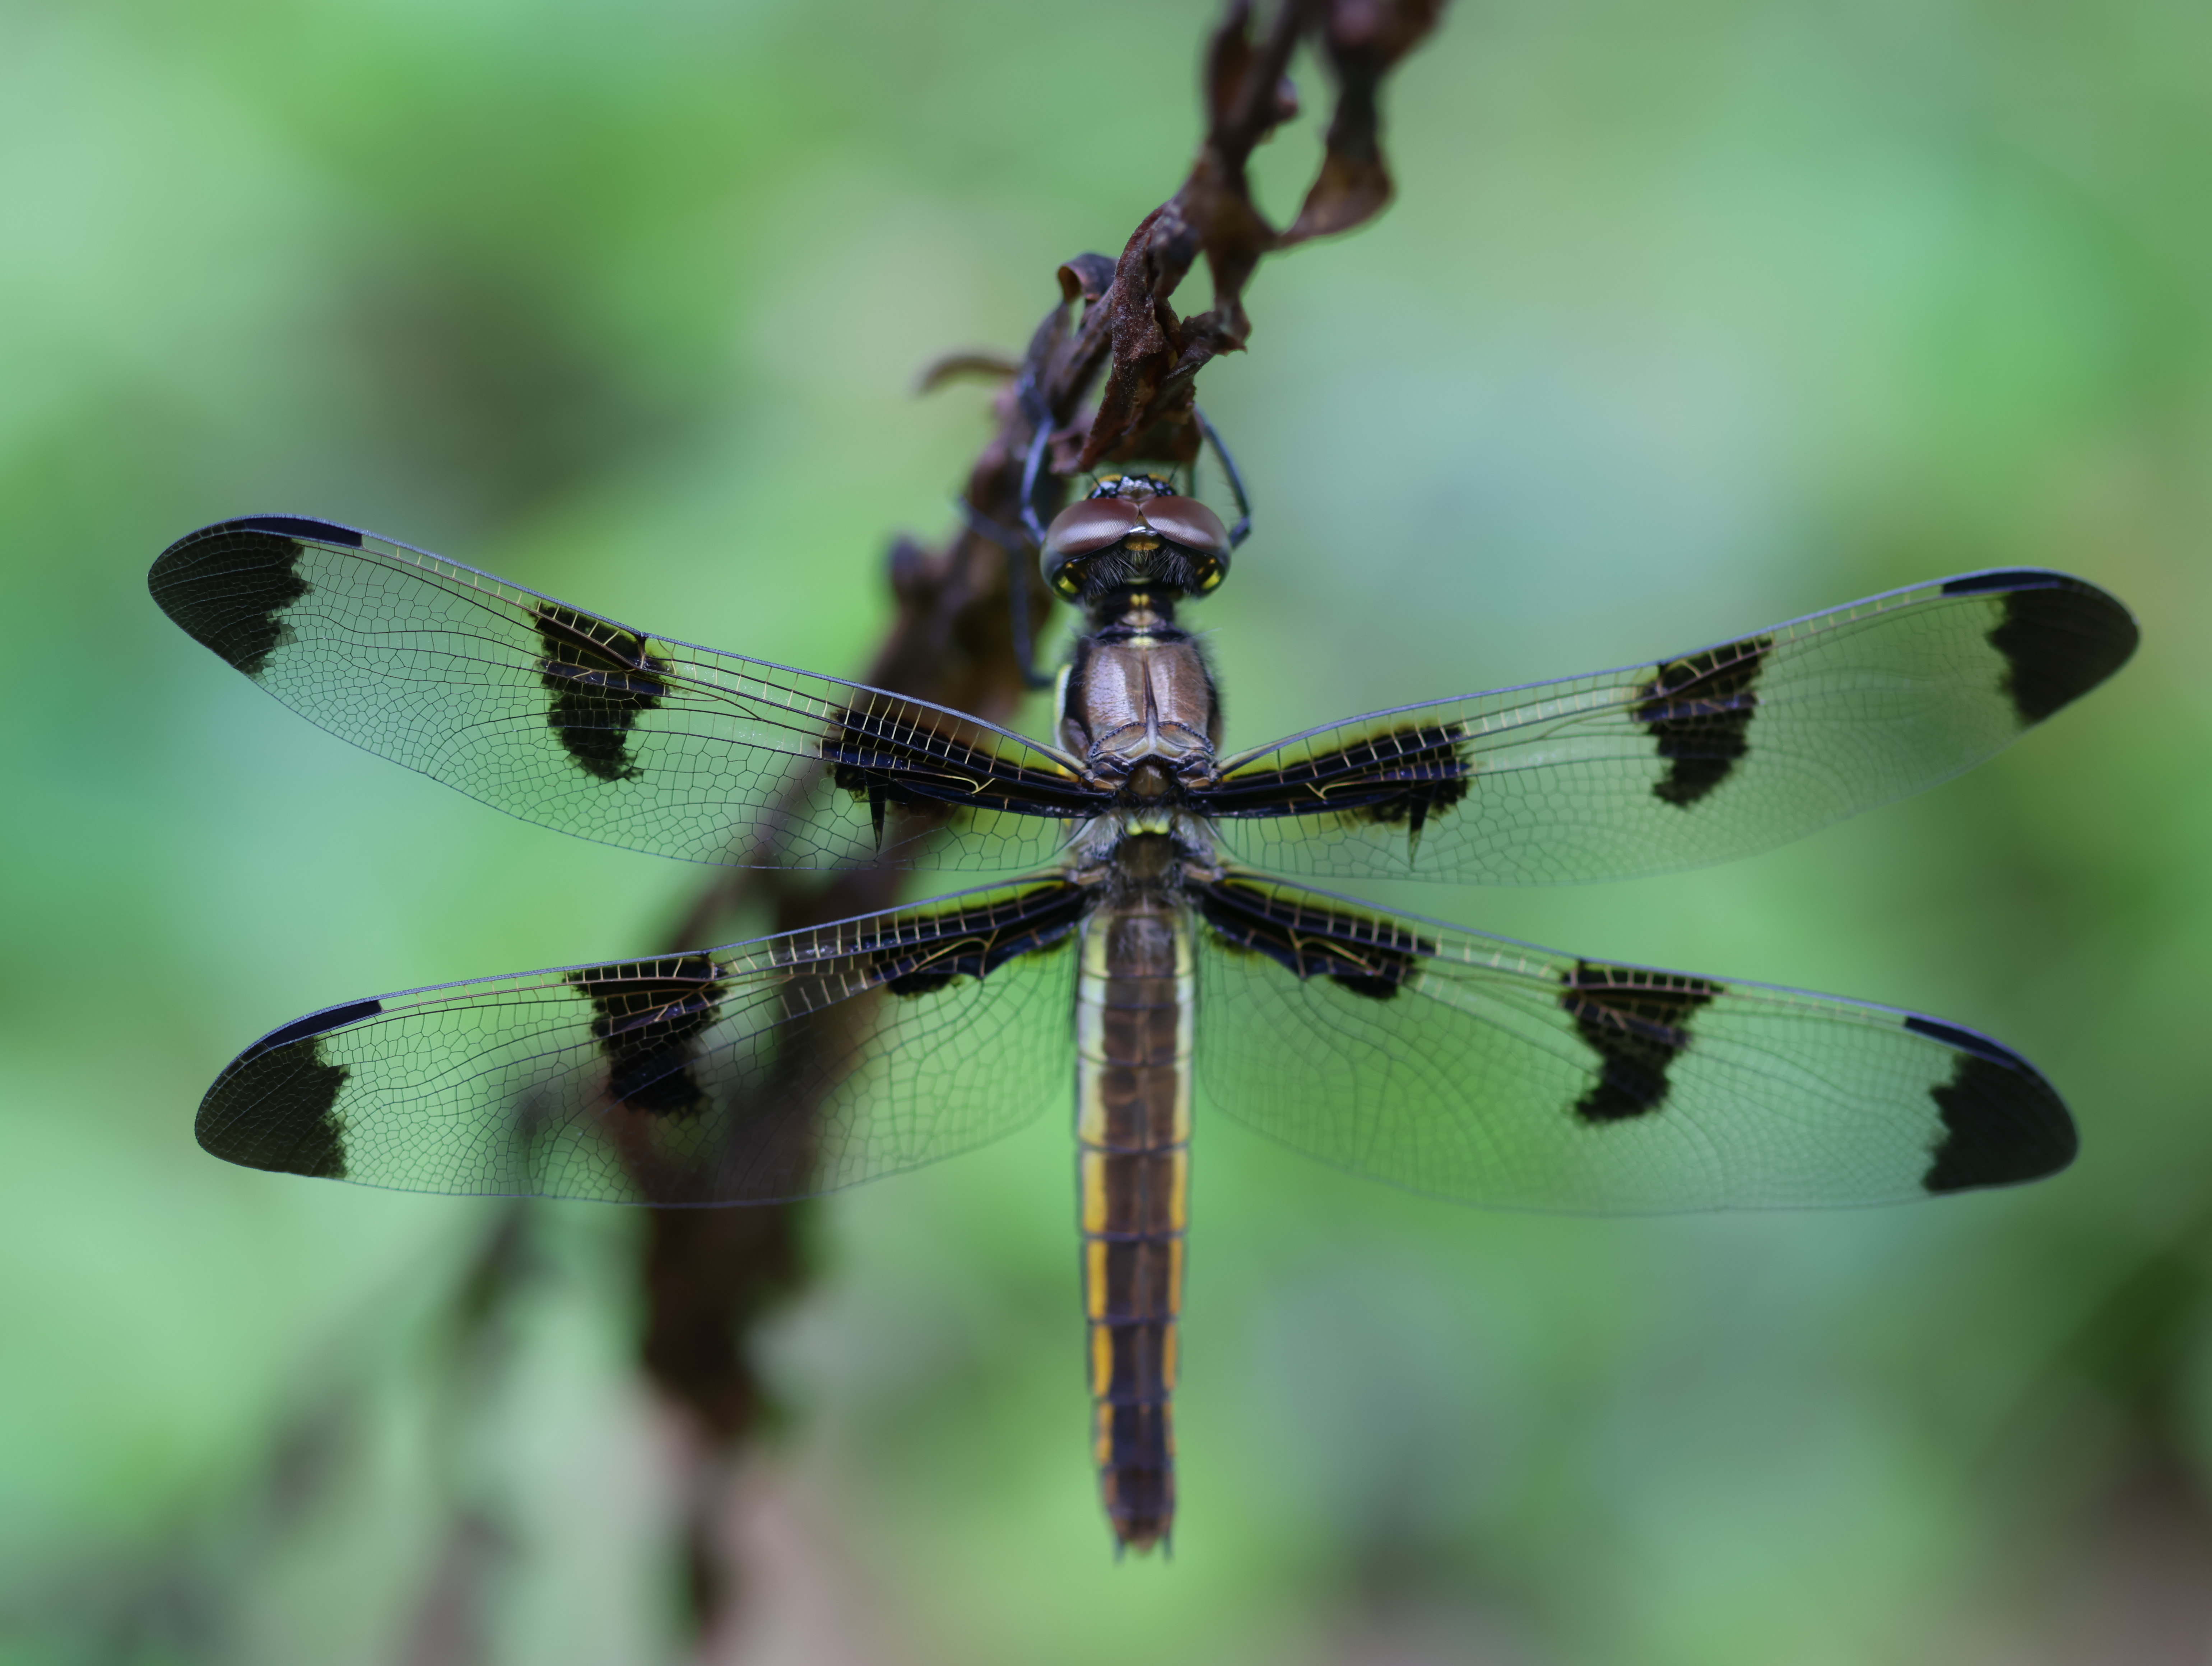 black-and-yellow dragonfly with three sets of black patches on wings